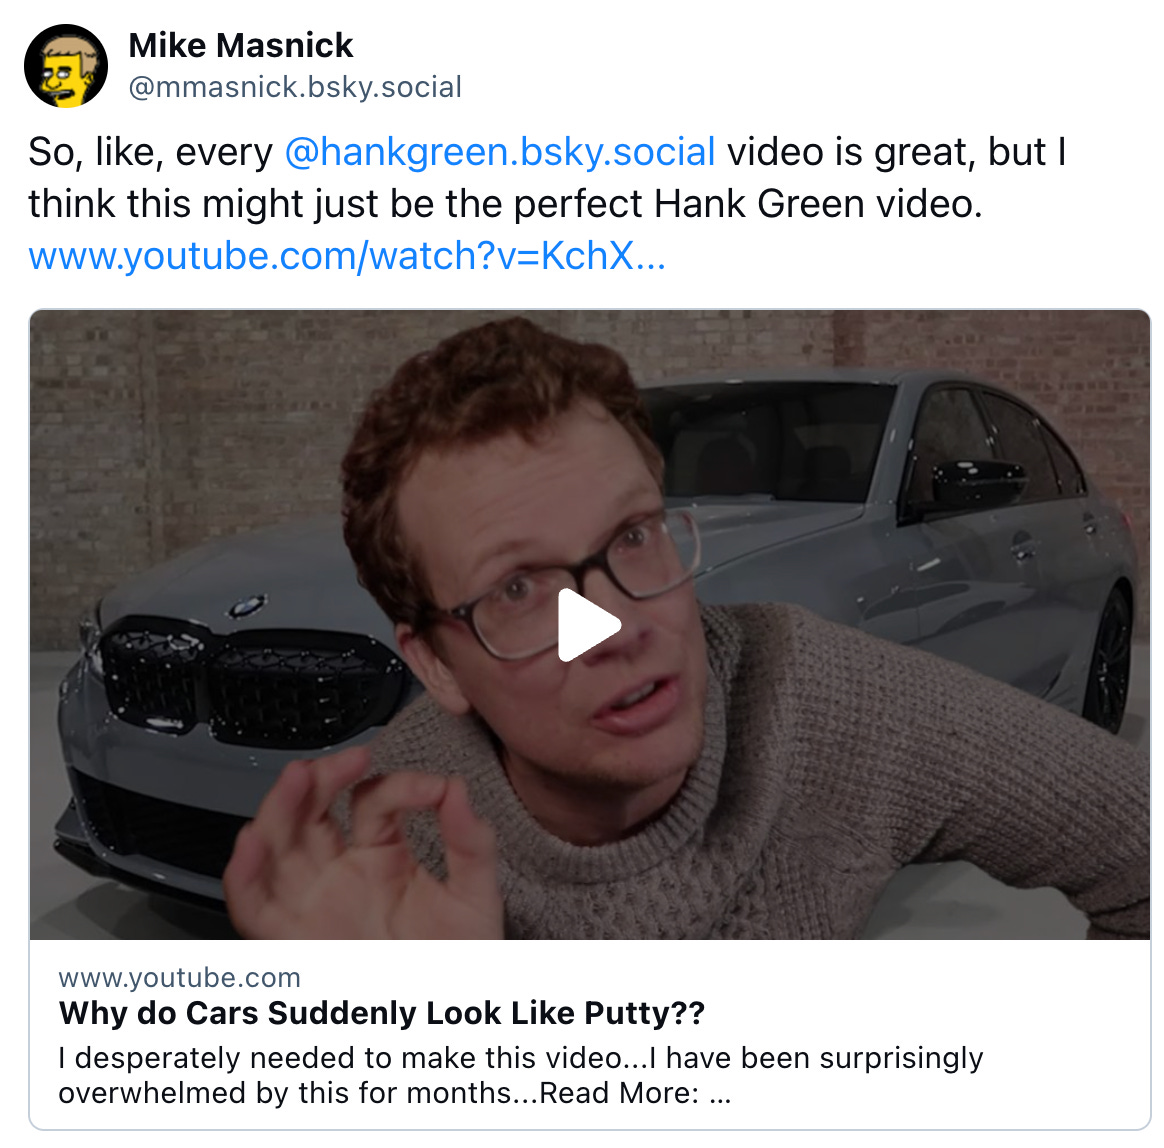  Mike Masnick @mmasnick.bsky.social So, like, every @hankgreen.bsky.social video is great, but I think this might just be the perfect Hank Green video. www.youtube.com/watch?v=KchX...   www.youtube.com Why do Cars Suddenly Look Like Putty?? I desperately needed to make this video...I have been surprisingly overwhelmed by this for months...Read More: https://www.latimes.com/business/story/2023-03...